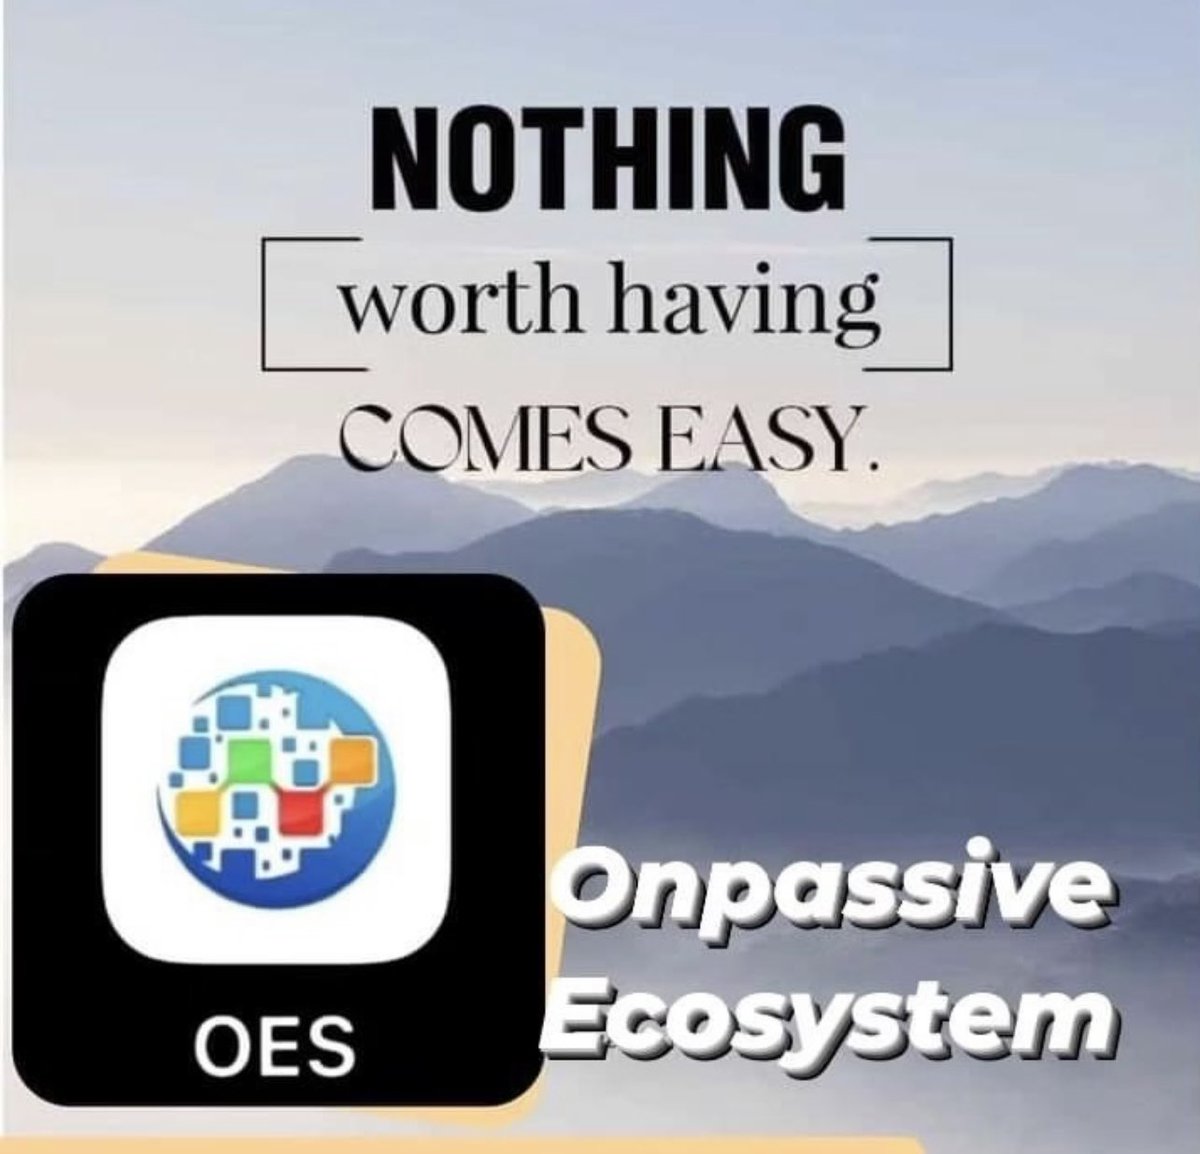 The Best Things in Life Don't Come Easy, but Thanks to the Sacrifices made by ONPASSIVE it will be Worth It!

Create a Free Acc Here: o-trim.co/paulsamoes

#ONPASSIVE #TheFutureOfInternet #ResidualIncome #allautomated #AIproducts #AItools #onlinebusiness